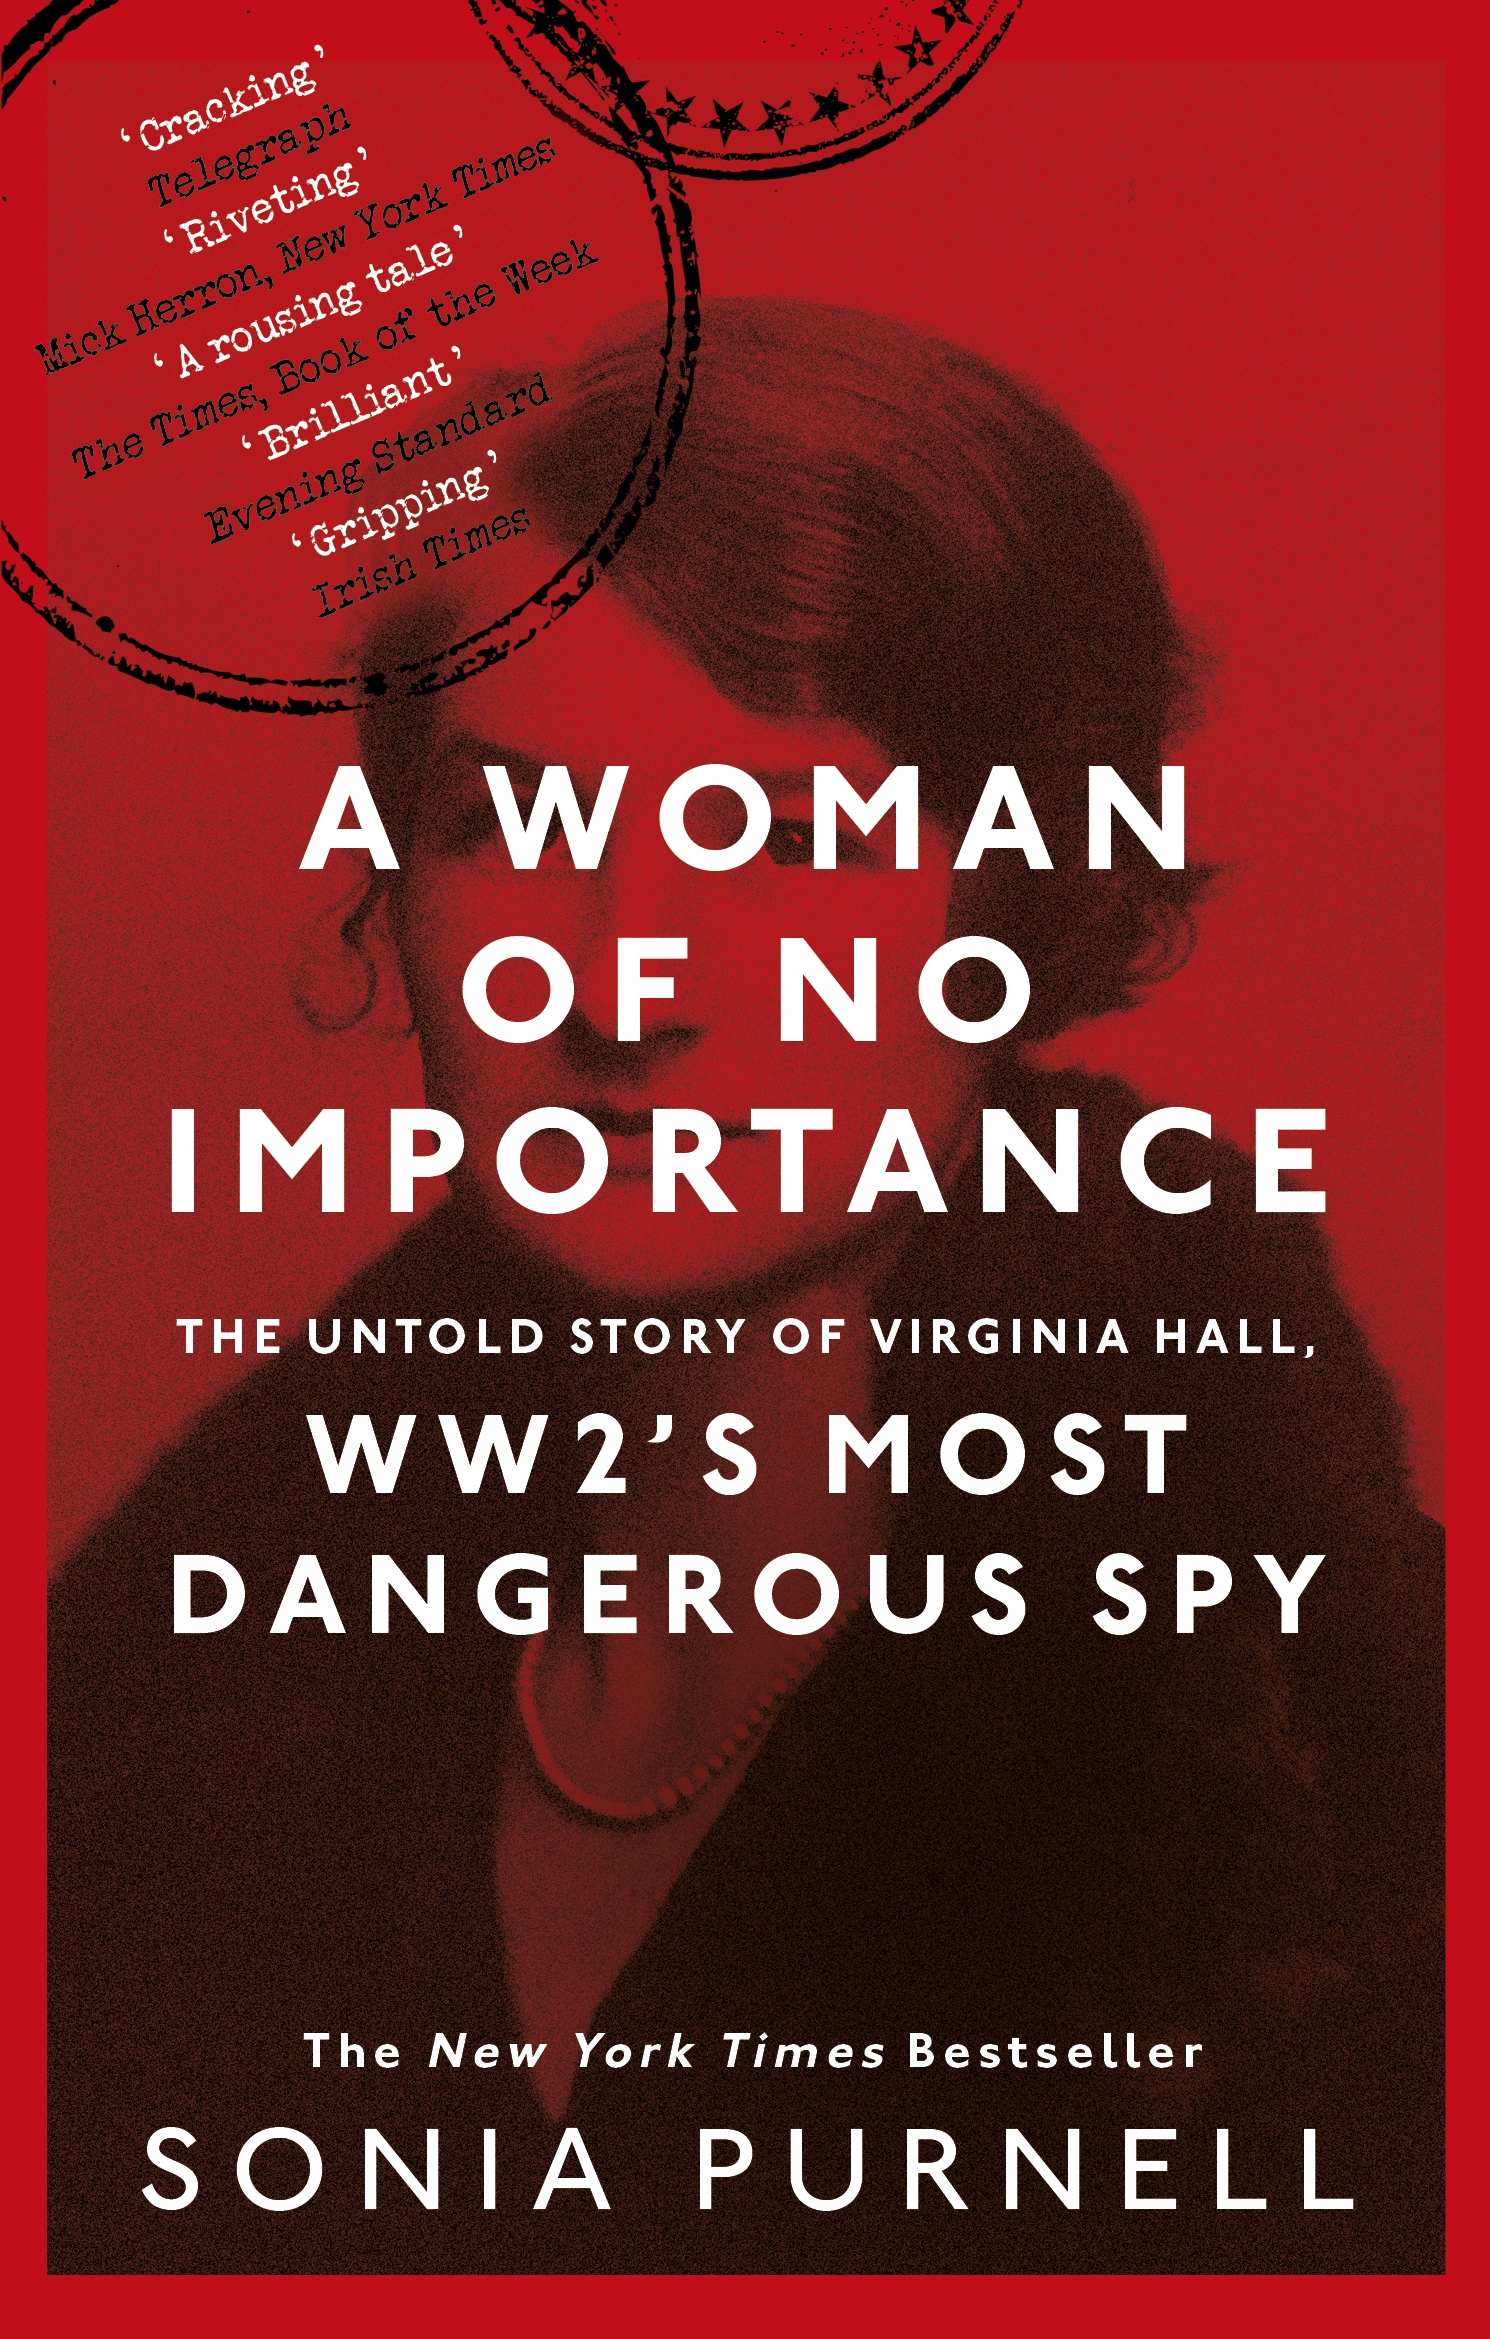 a woman of no importance book review